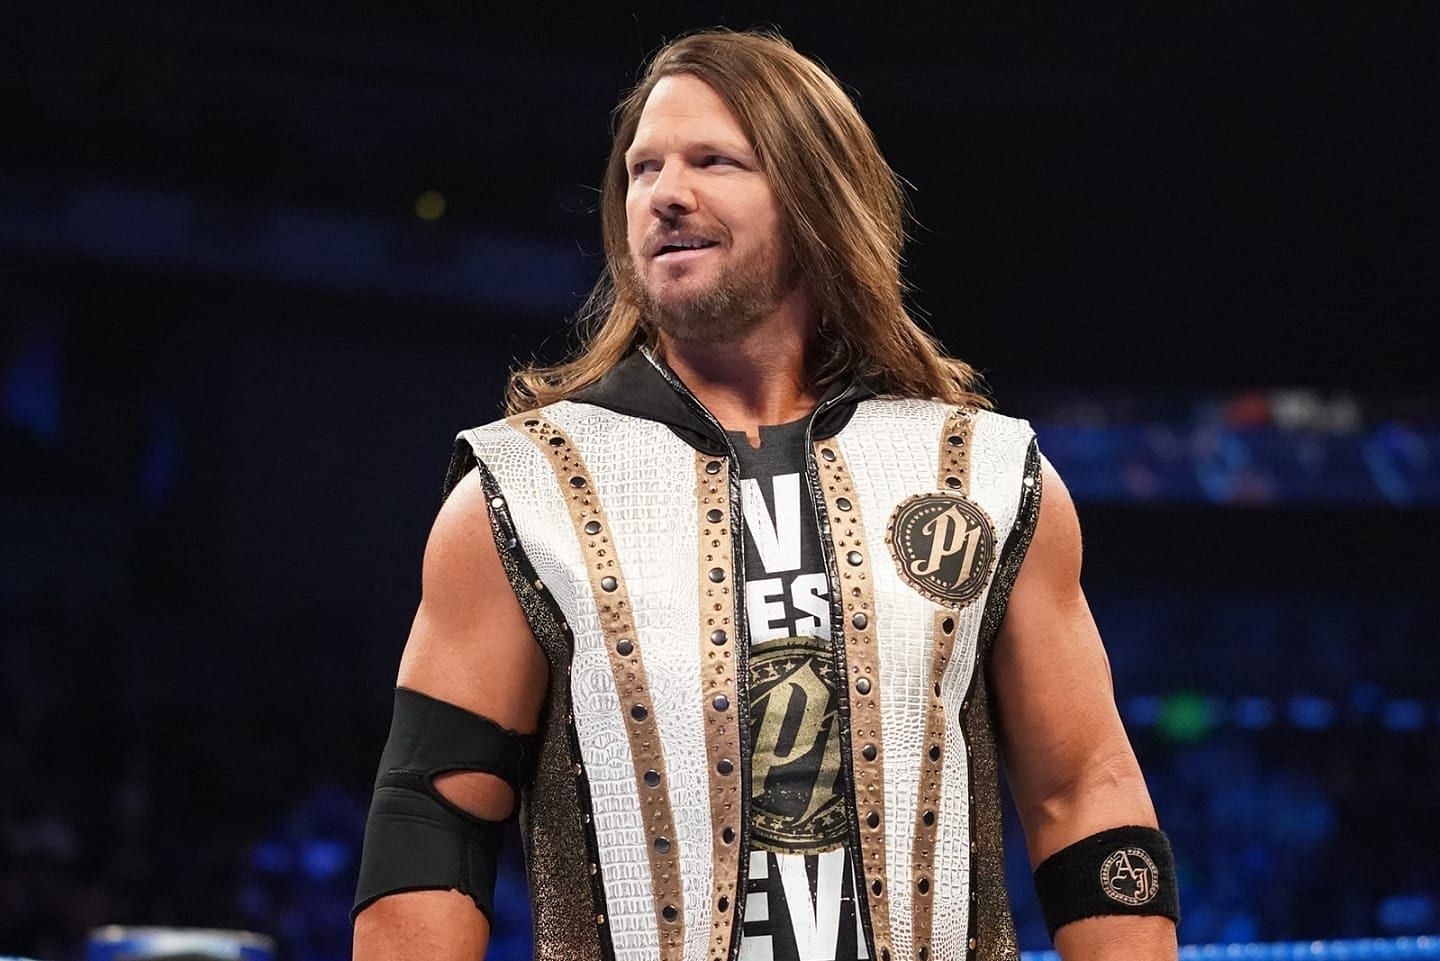 AJ Styles has signed another contract in 2022